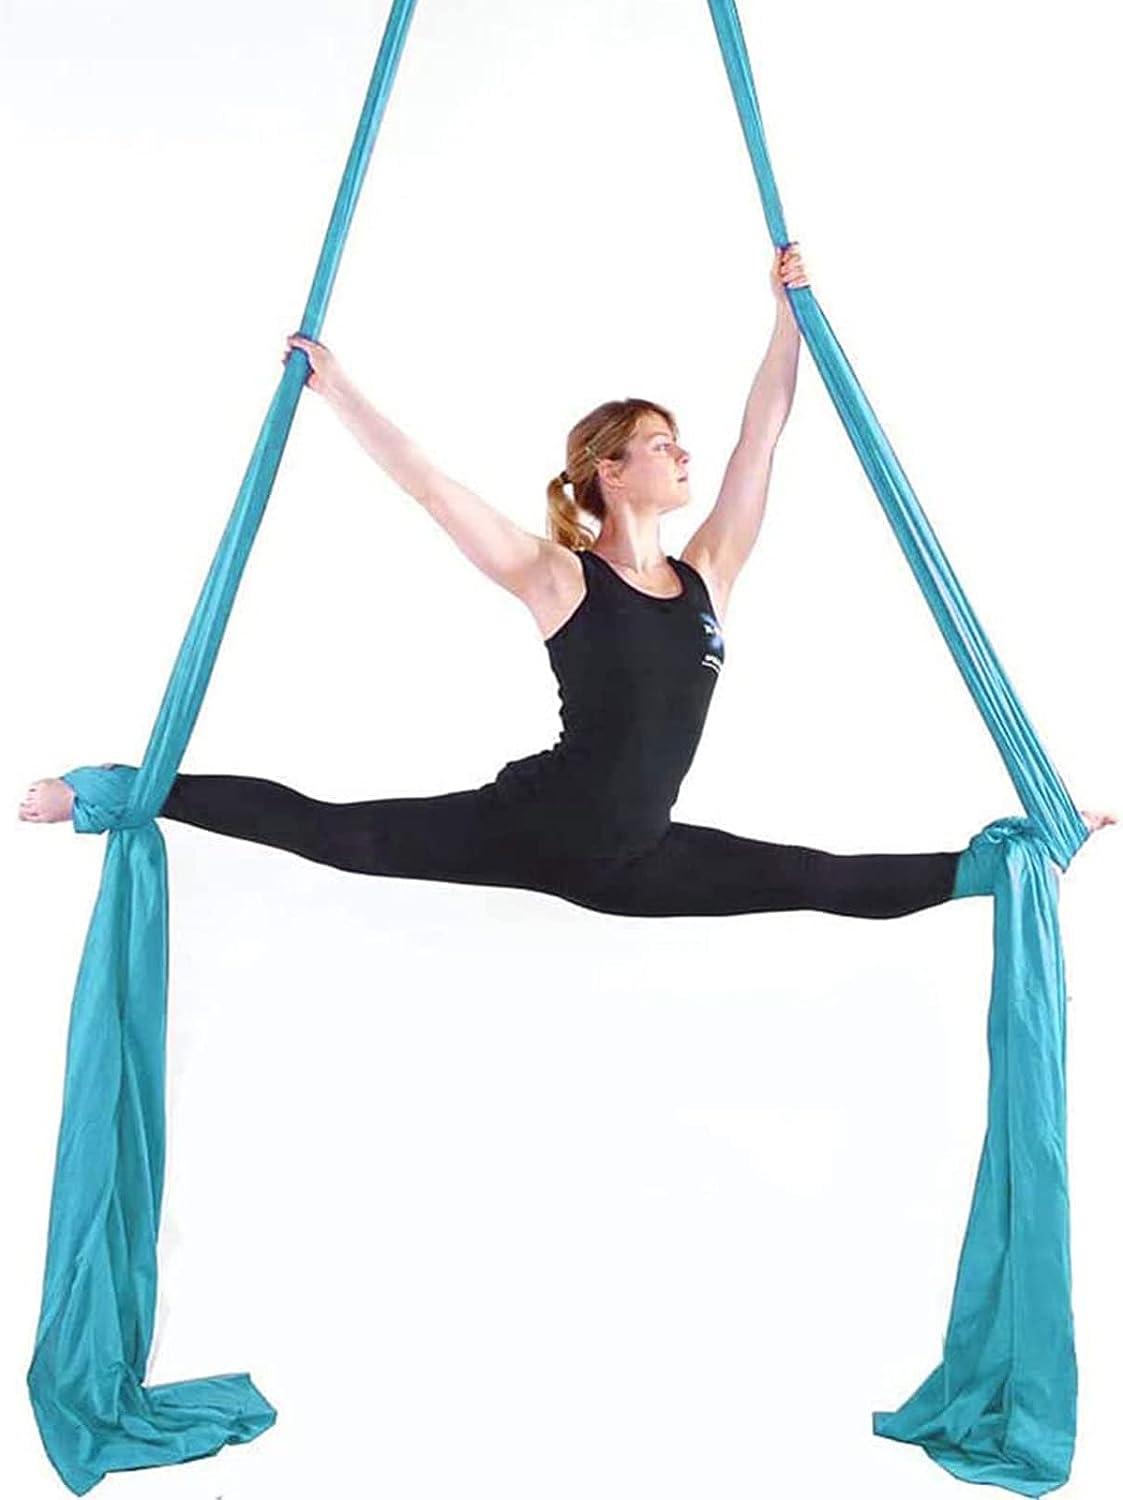 Aerial Silks for Aerial Acrobatic Dance 60in Wide (10 Yards) with The  Equipment,Guide (Aqua)